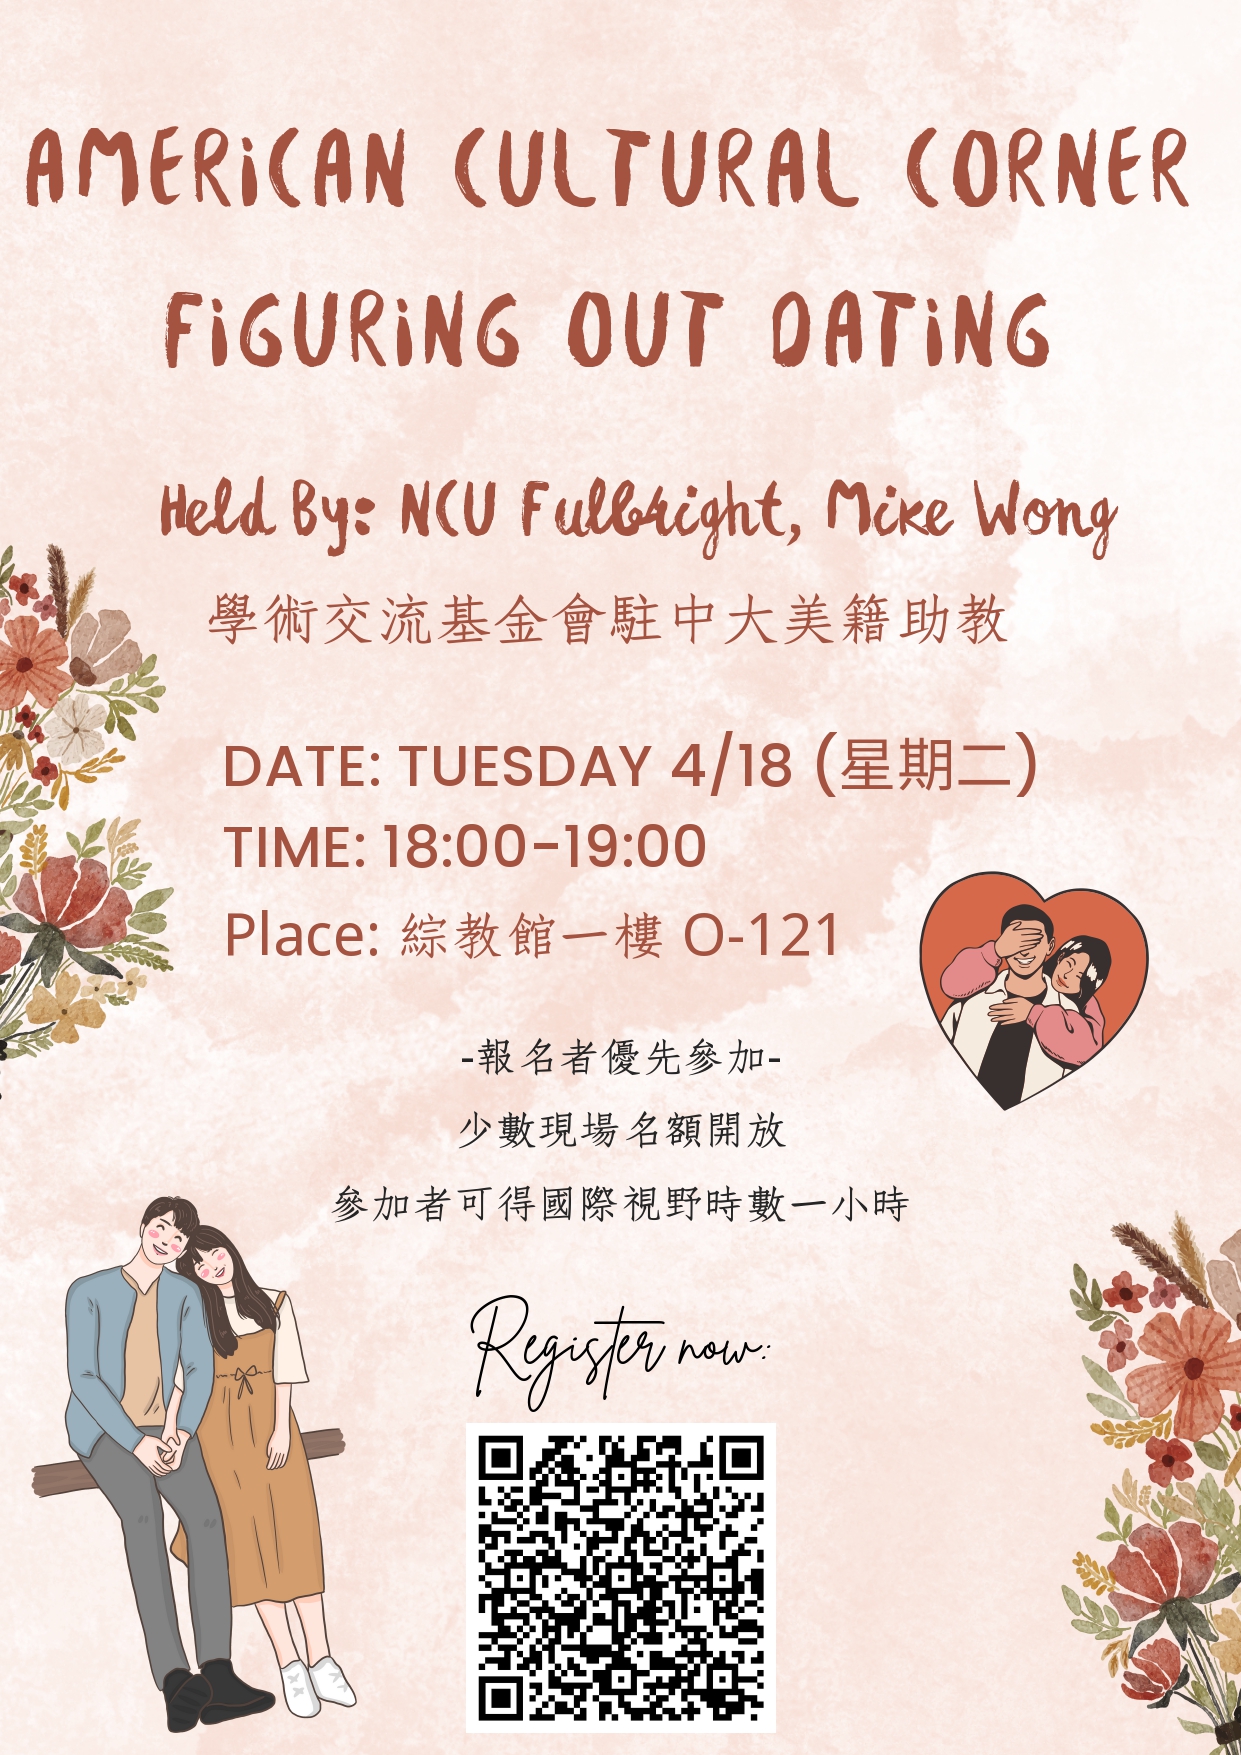 111-2 Semester Cultural Corner 2 - Figuring Out Dating.